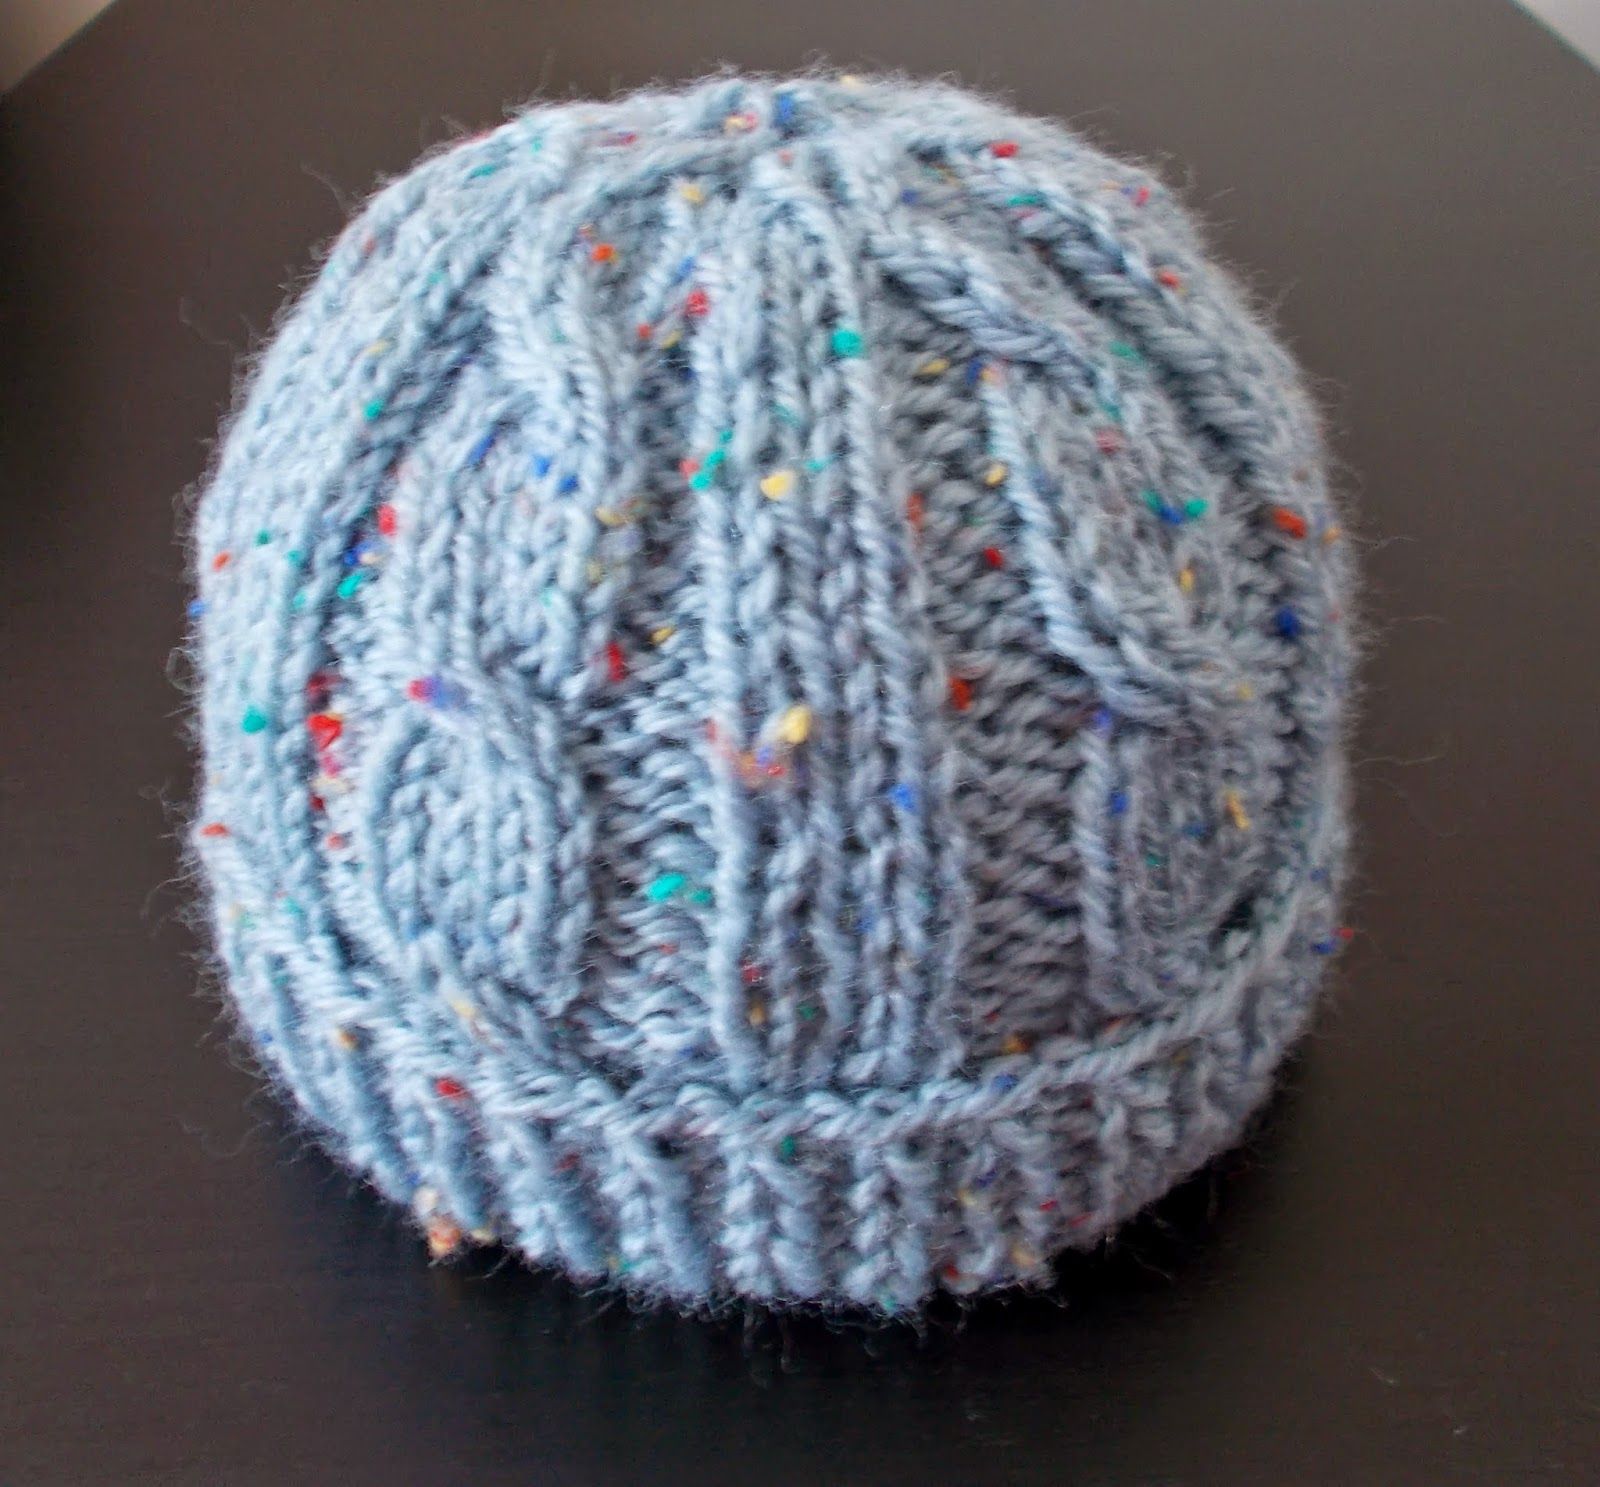 knitting instructions for baby hats